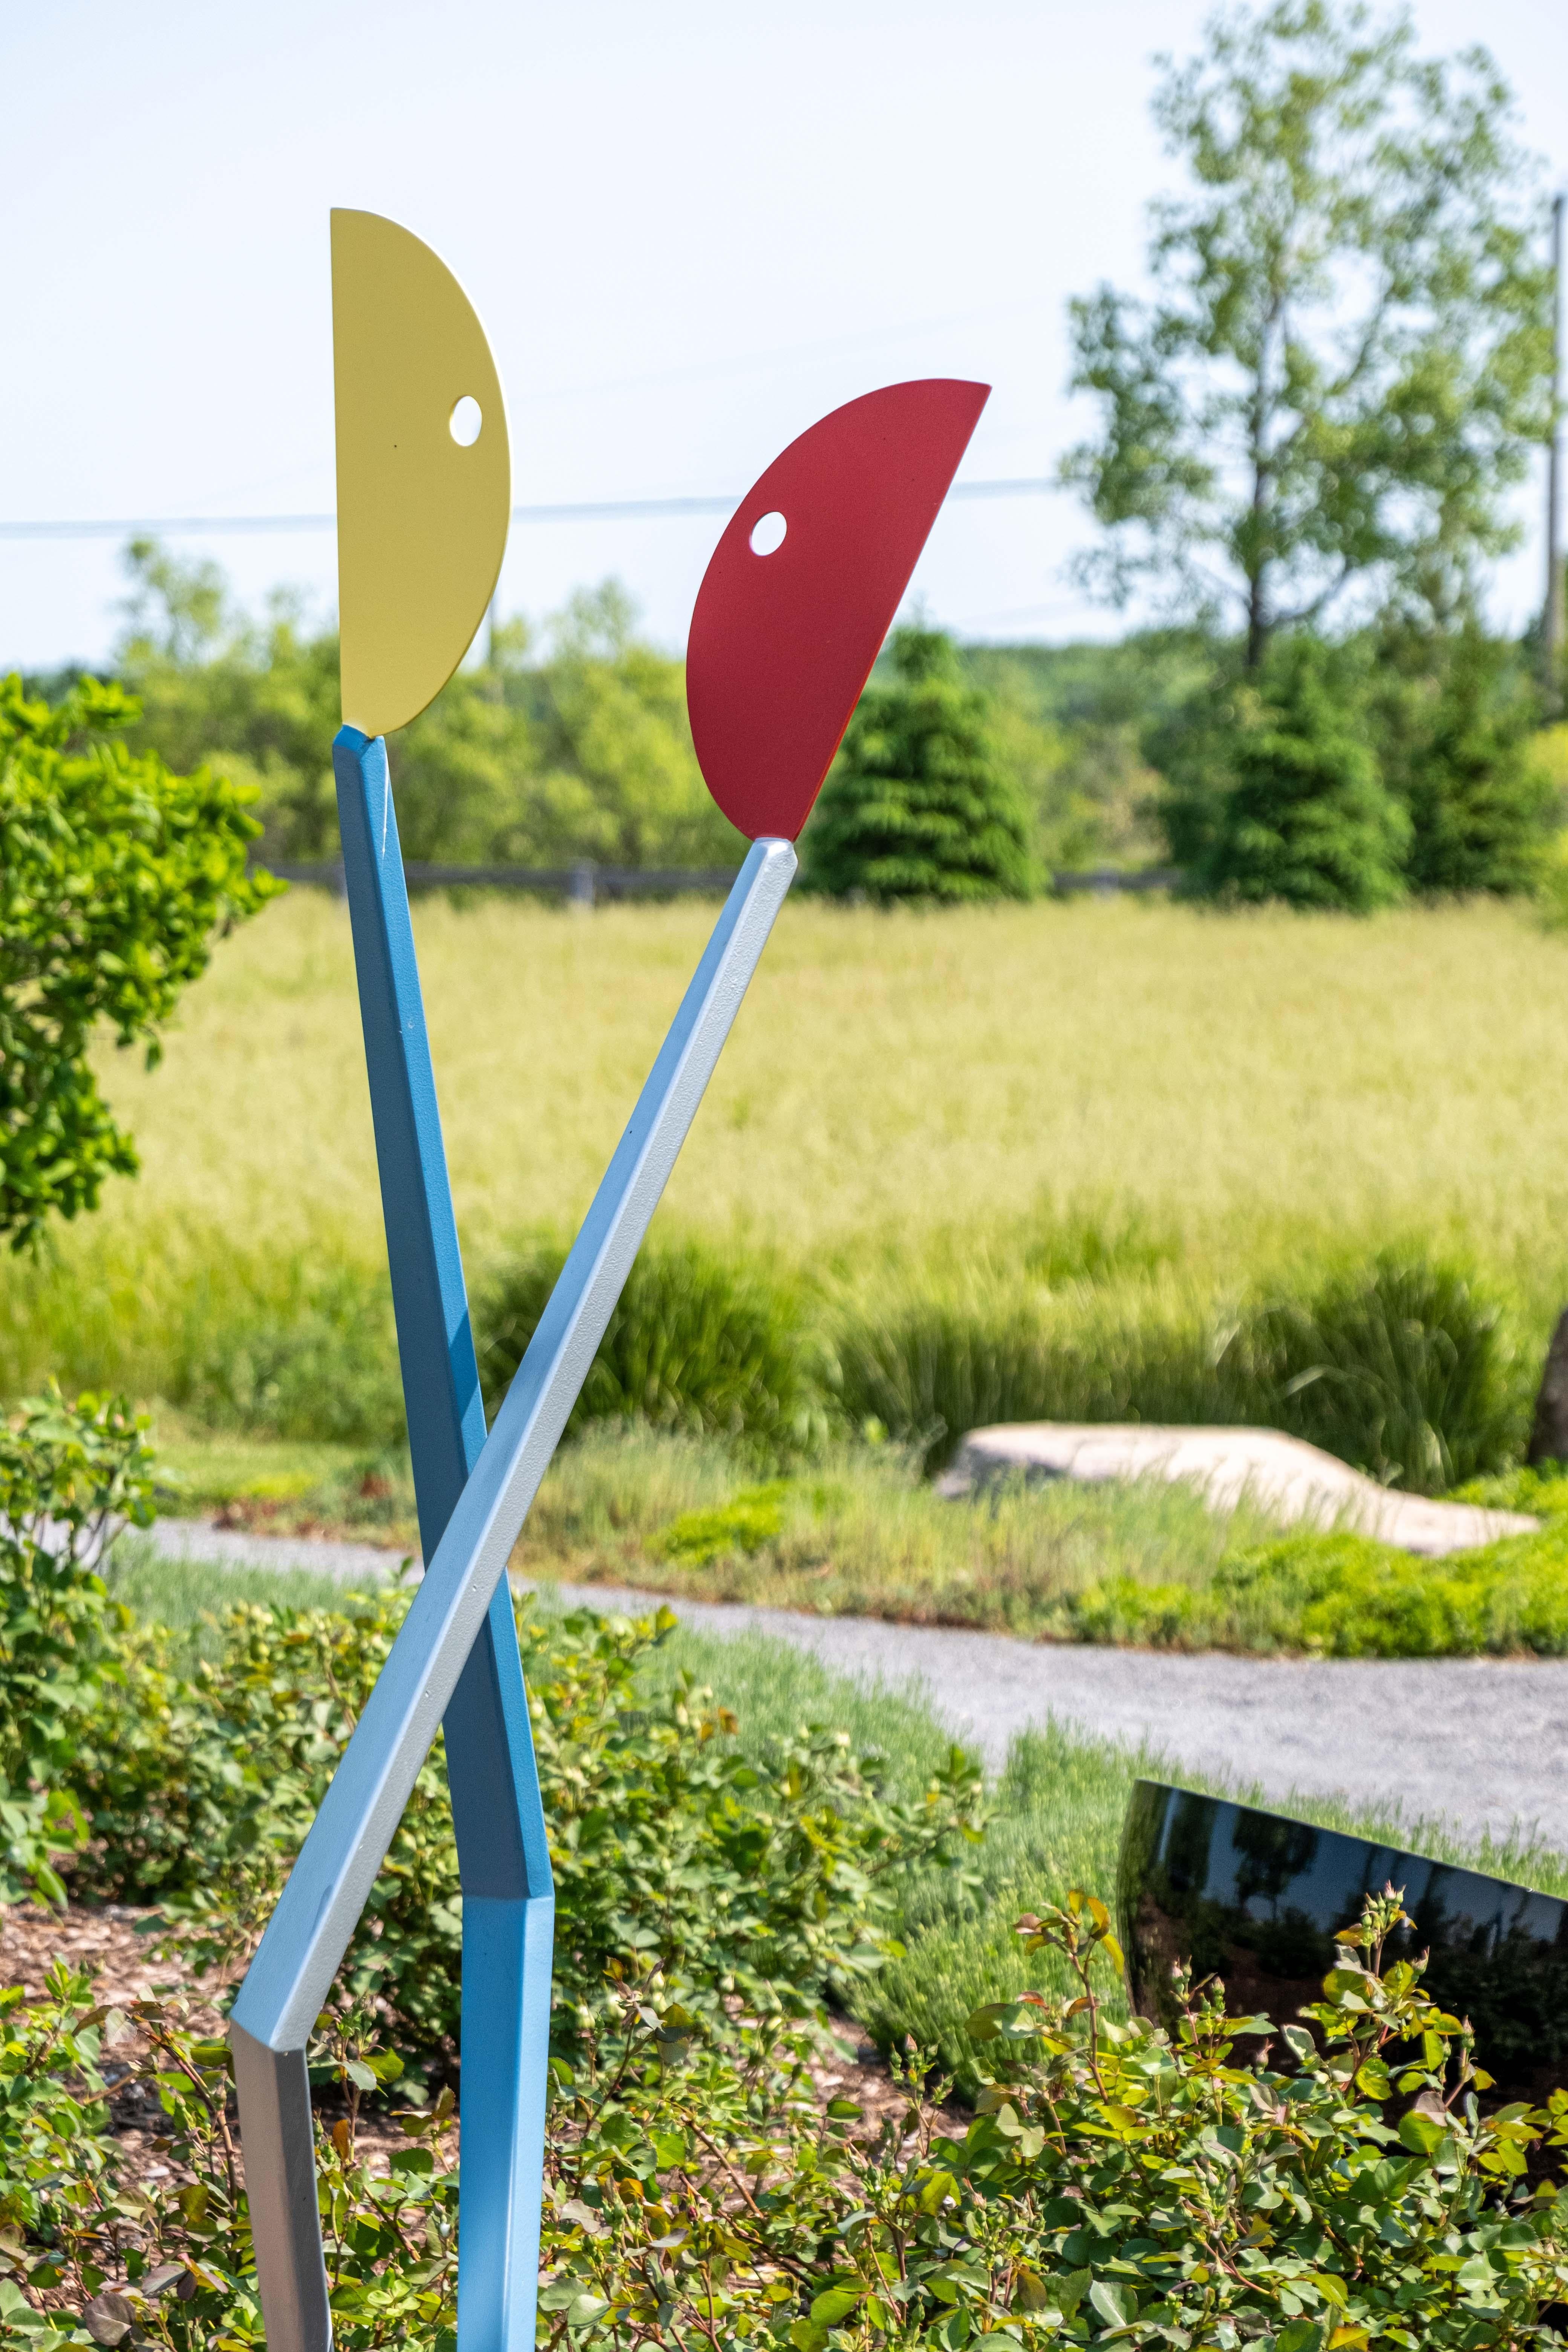 X-Y - tall, minimalist, abstracted figures, painted steel outdoor sculpture - Contemporary Sculpture by R. Clark Ellis